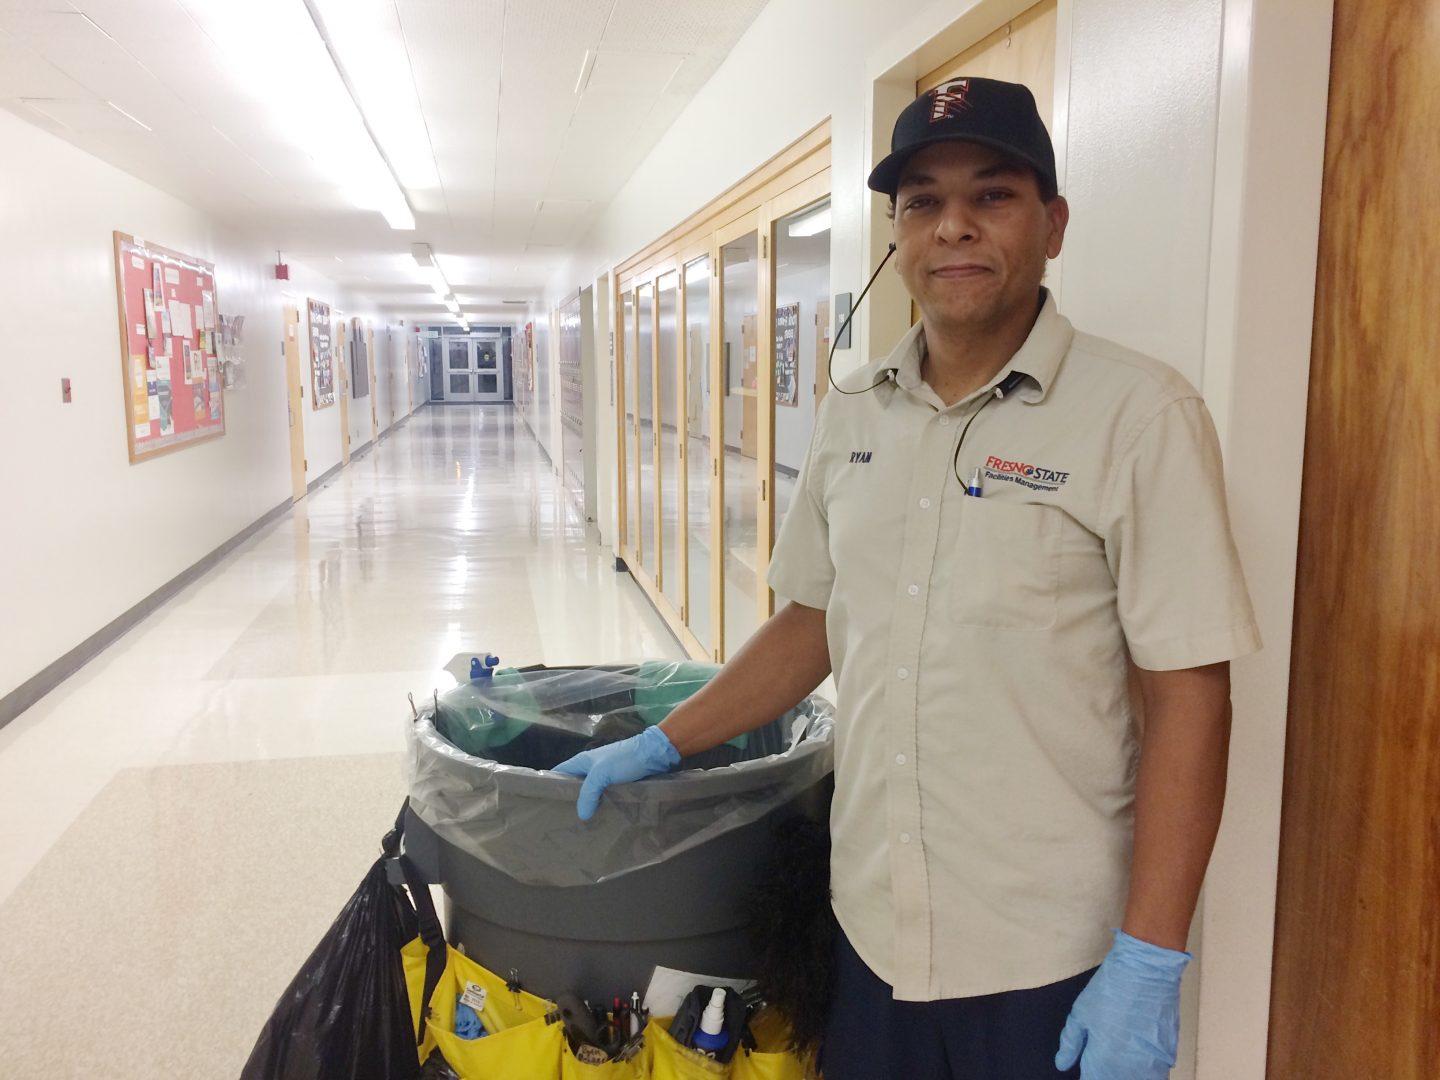 Ryan Young is a custodian at Fresno State who works the swing shift, from 5 p.m. to 1:30 a.m., Monday through Friday. (Paige Gibbs/The Collegian)